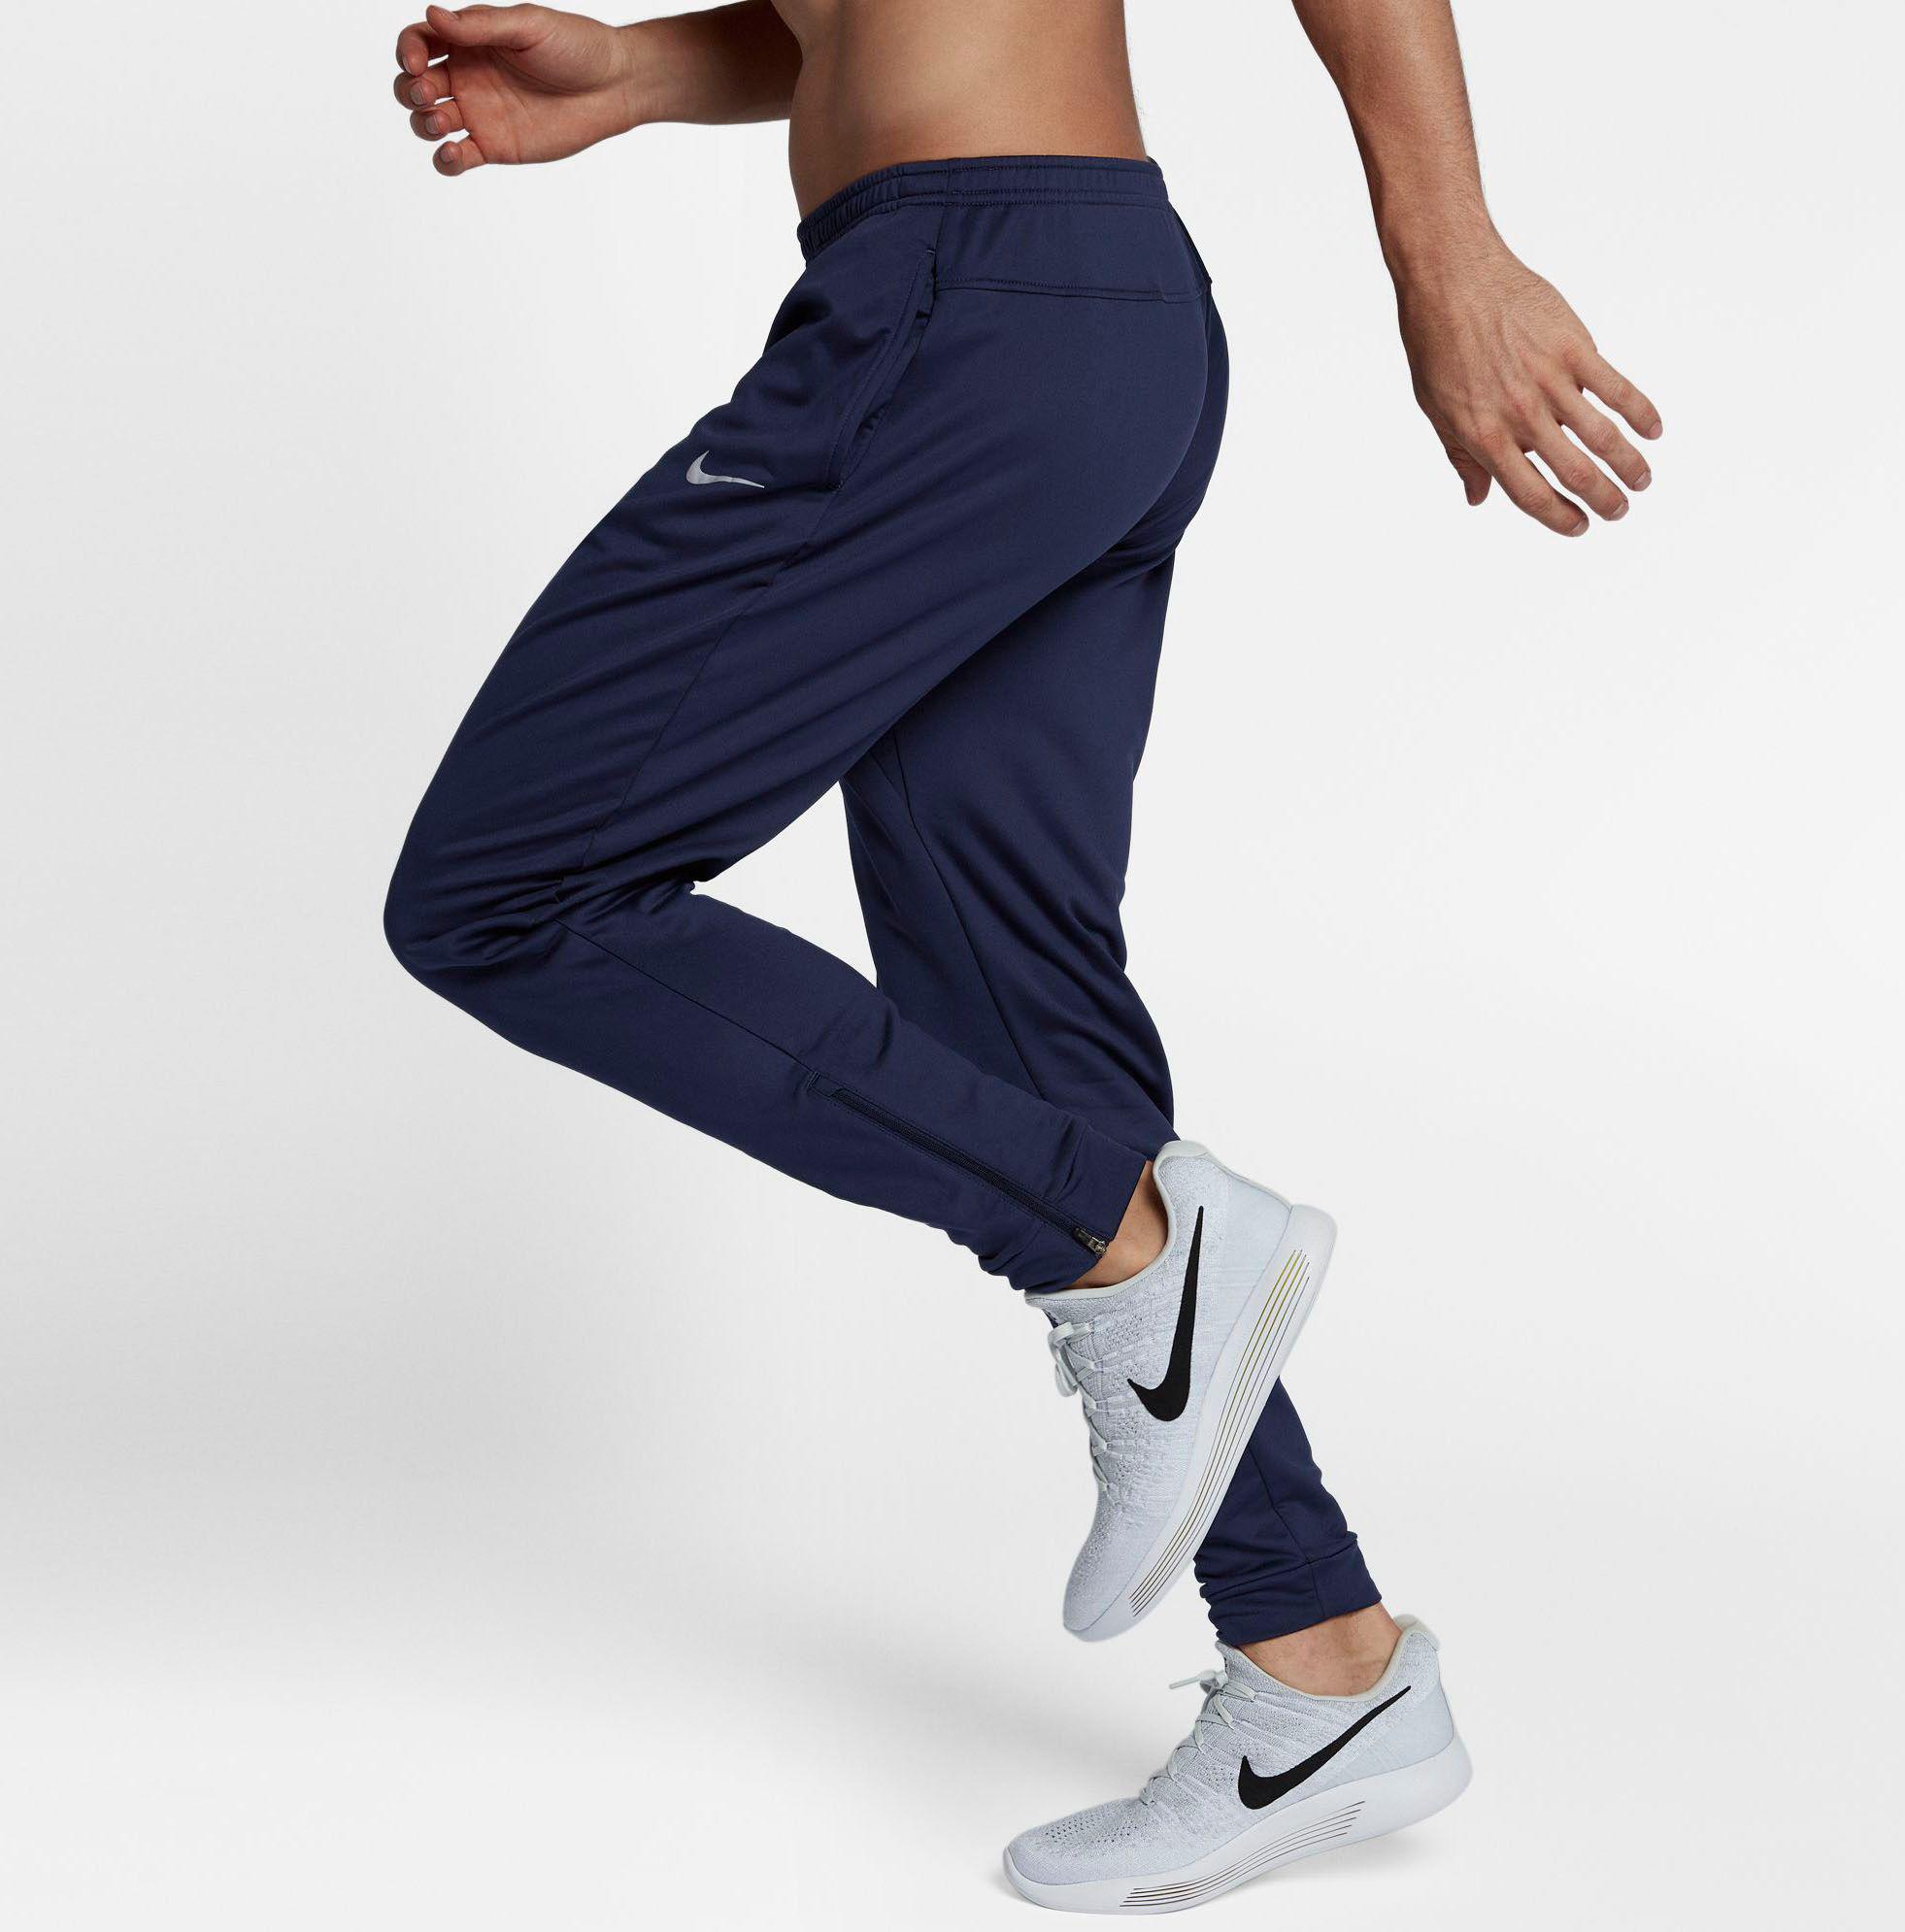 therma essential running pants